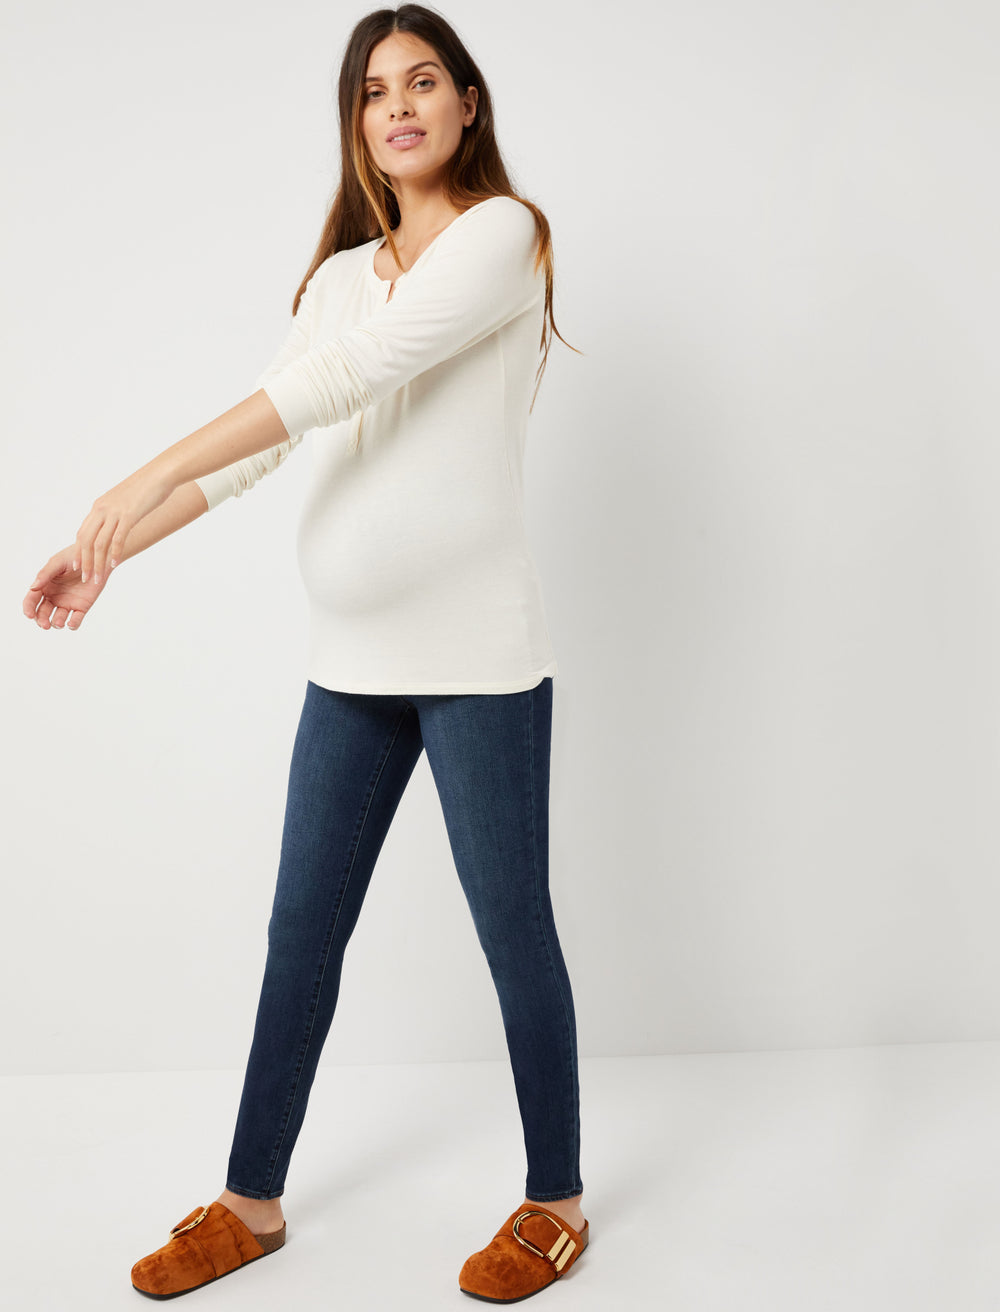 Ultimate Maternity Jeans Review - By Lauren M